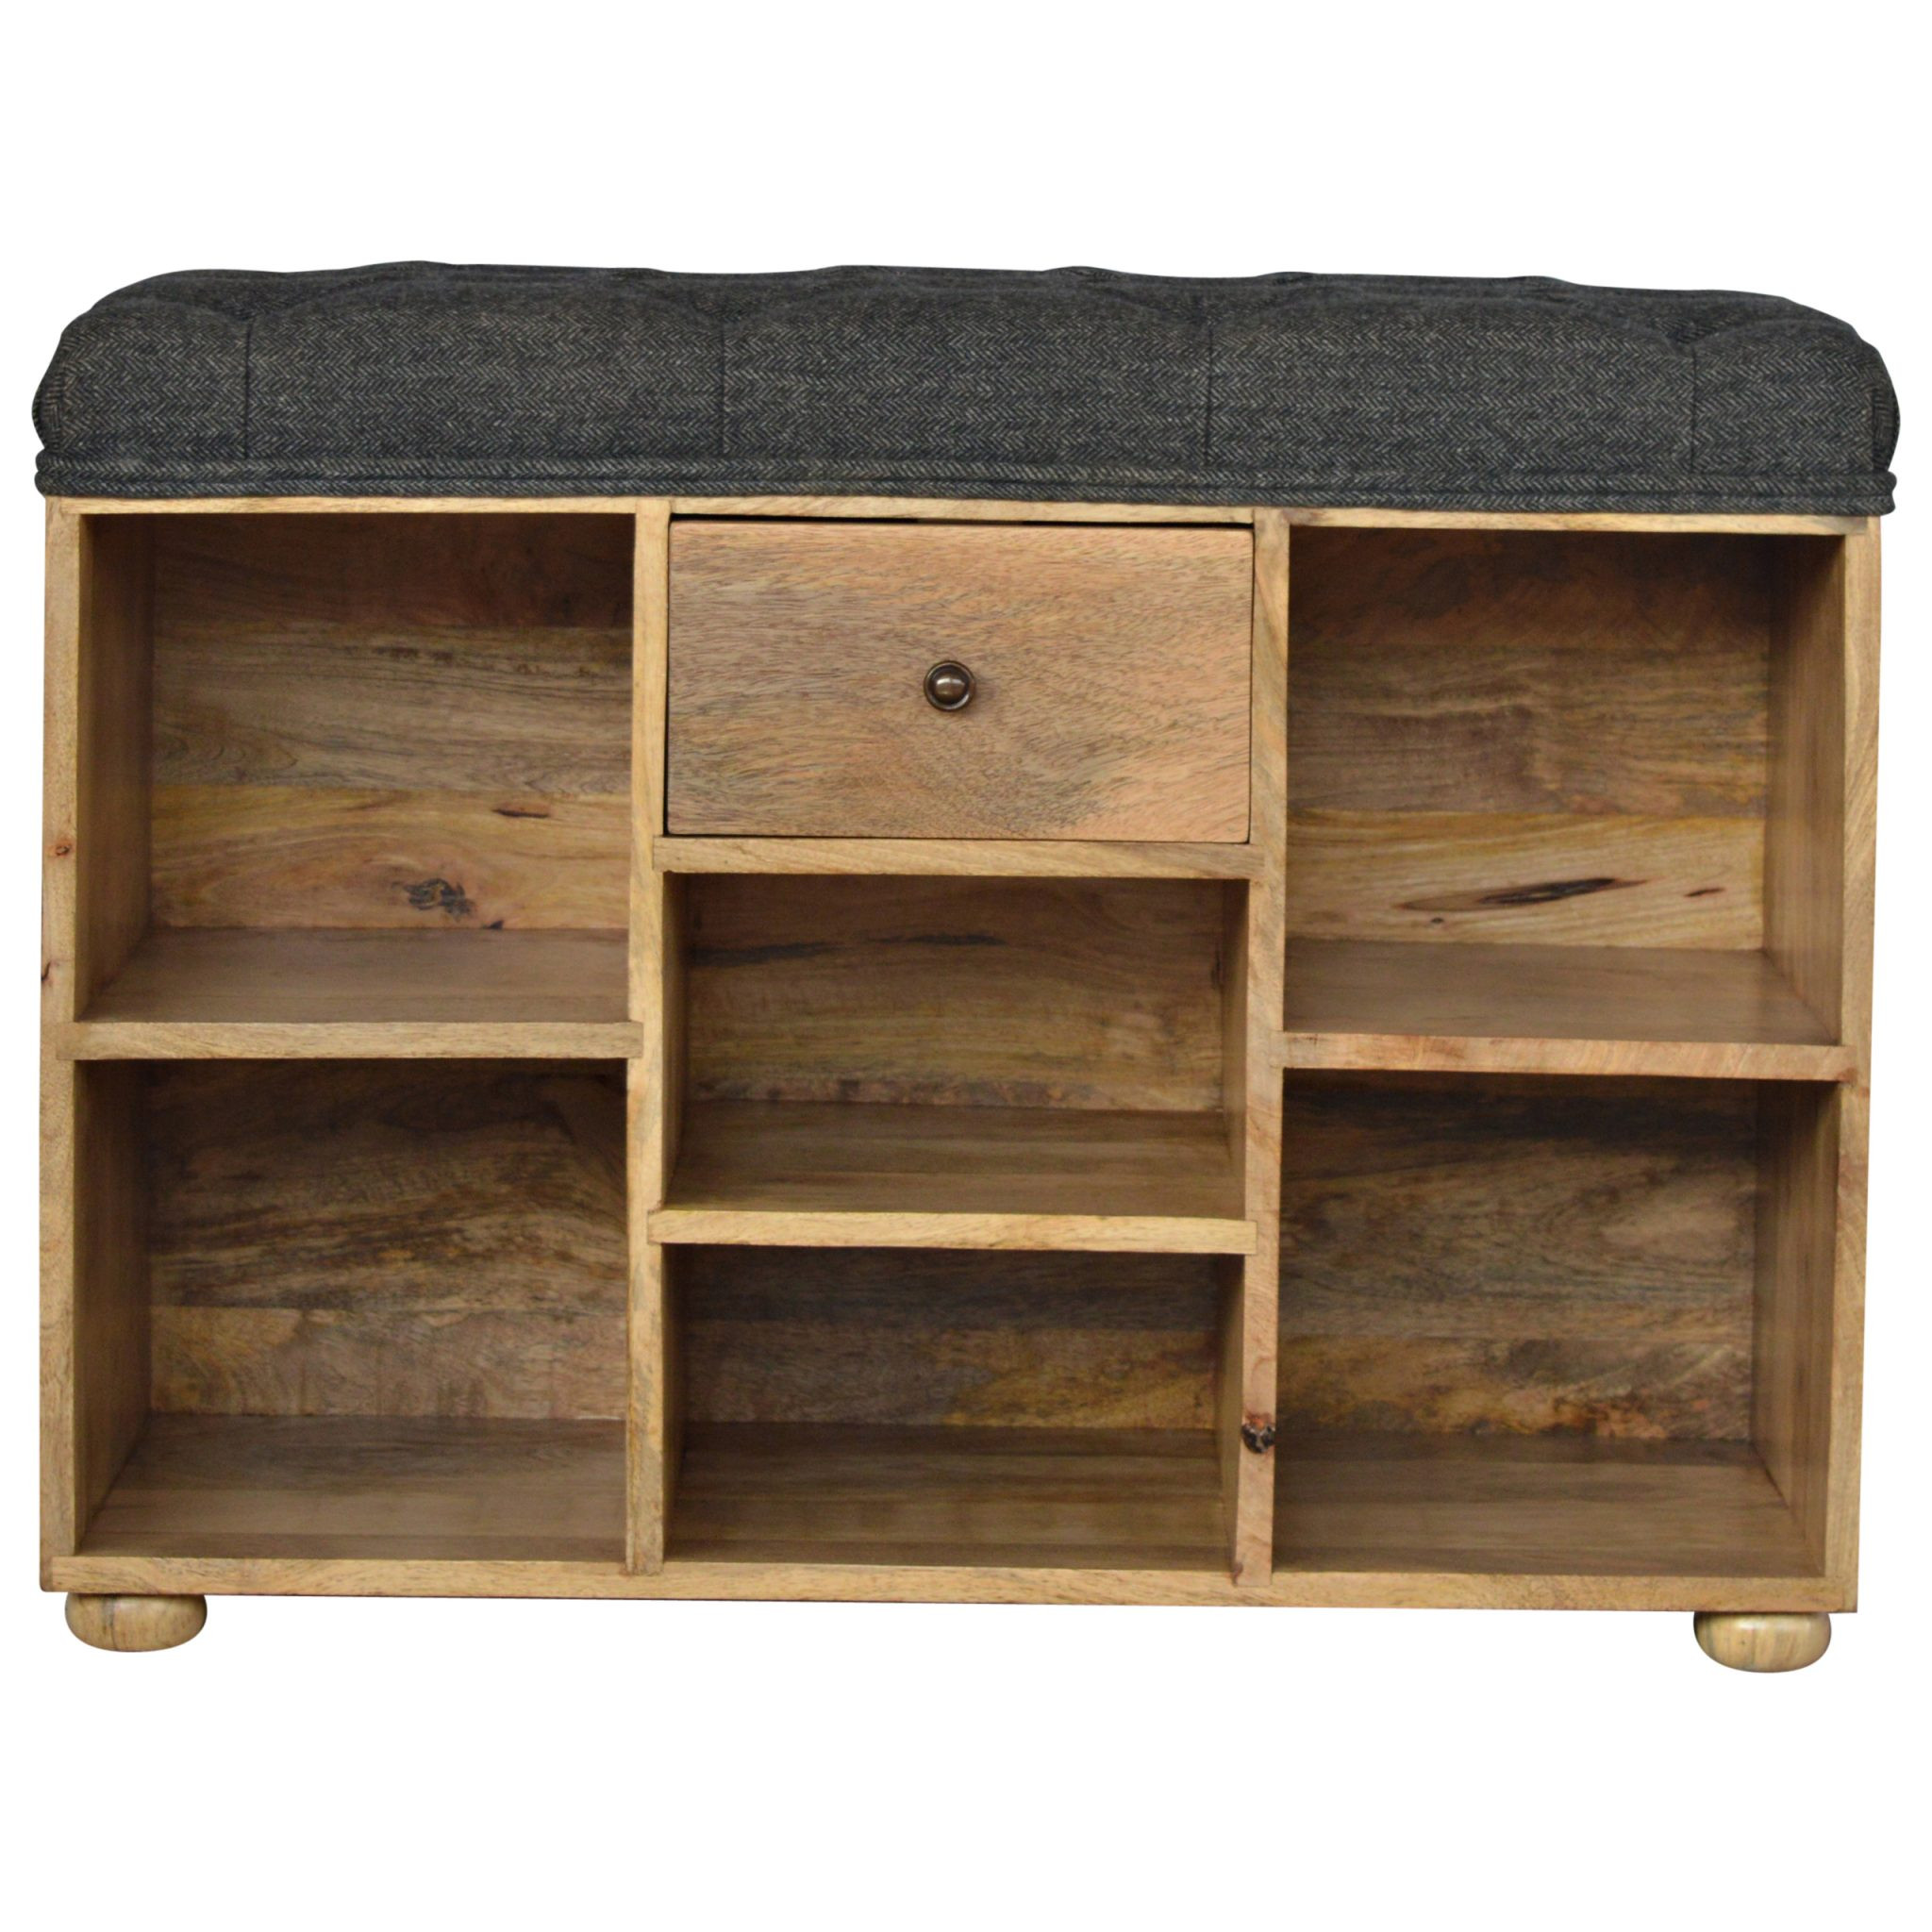 Bedroom Bench With Shoe Storage
 Solid Wood Shoe Storage Bench With Upholstered Black Tweed